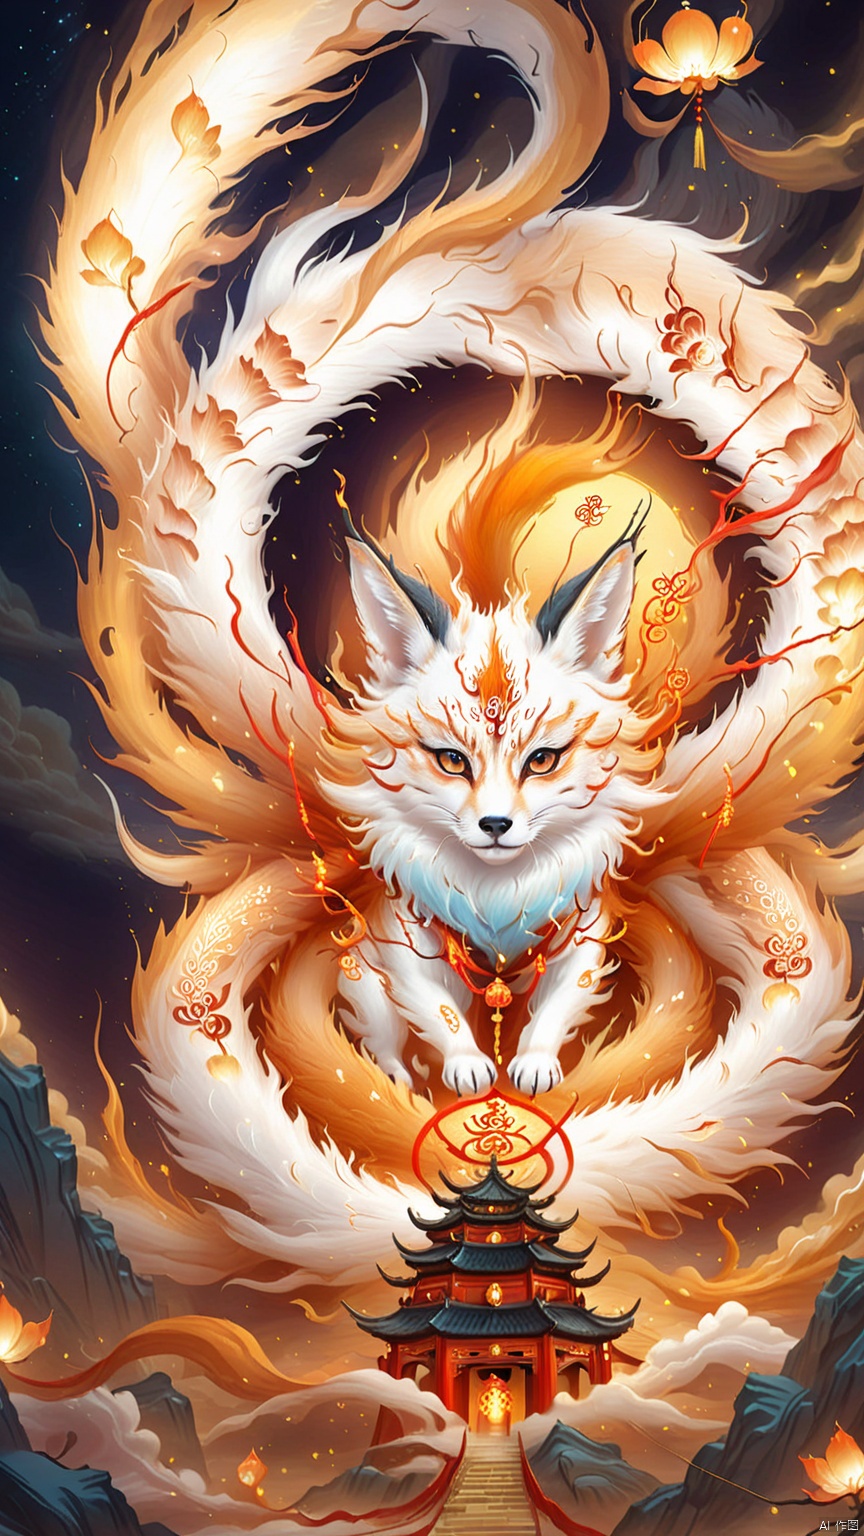  (Chinese fantasy illustration style :1.5), big eyes, cute, (light painting concept design :1.2), nine-tailed fox, hung with golden lights, dancing at night. The nine-tailed fox's body glows a faint blue light that complements the warm glow of the lantern. Nine-tailed fox shuttles through the night, giving people a sense of mystery and peace, exquisite beauty, close-up of nine-tailed fox, mythological version illustration, surrealism, epic beauty, visual art